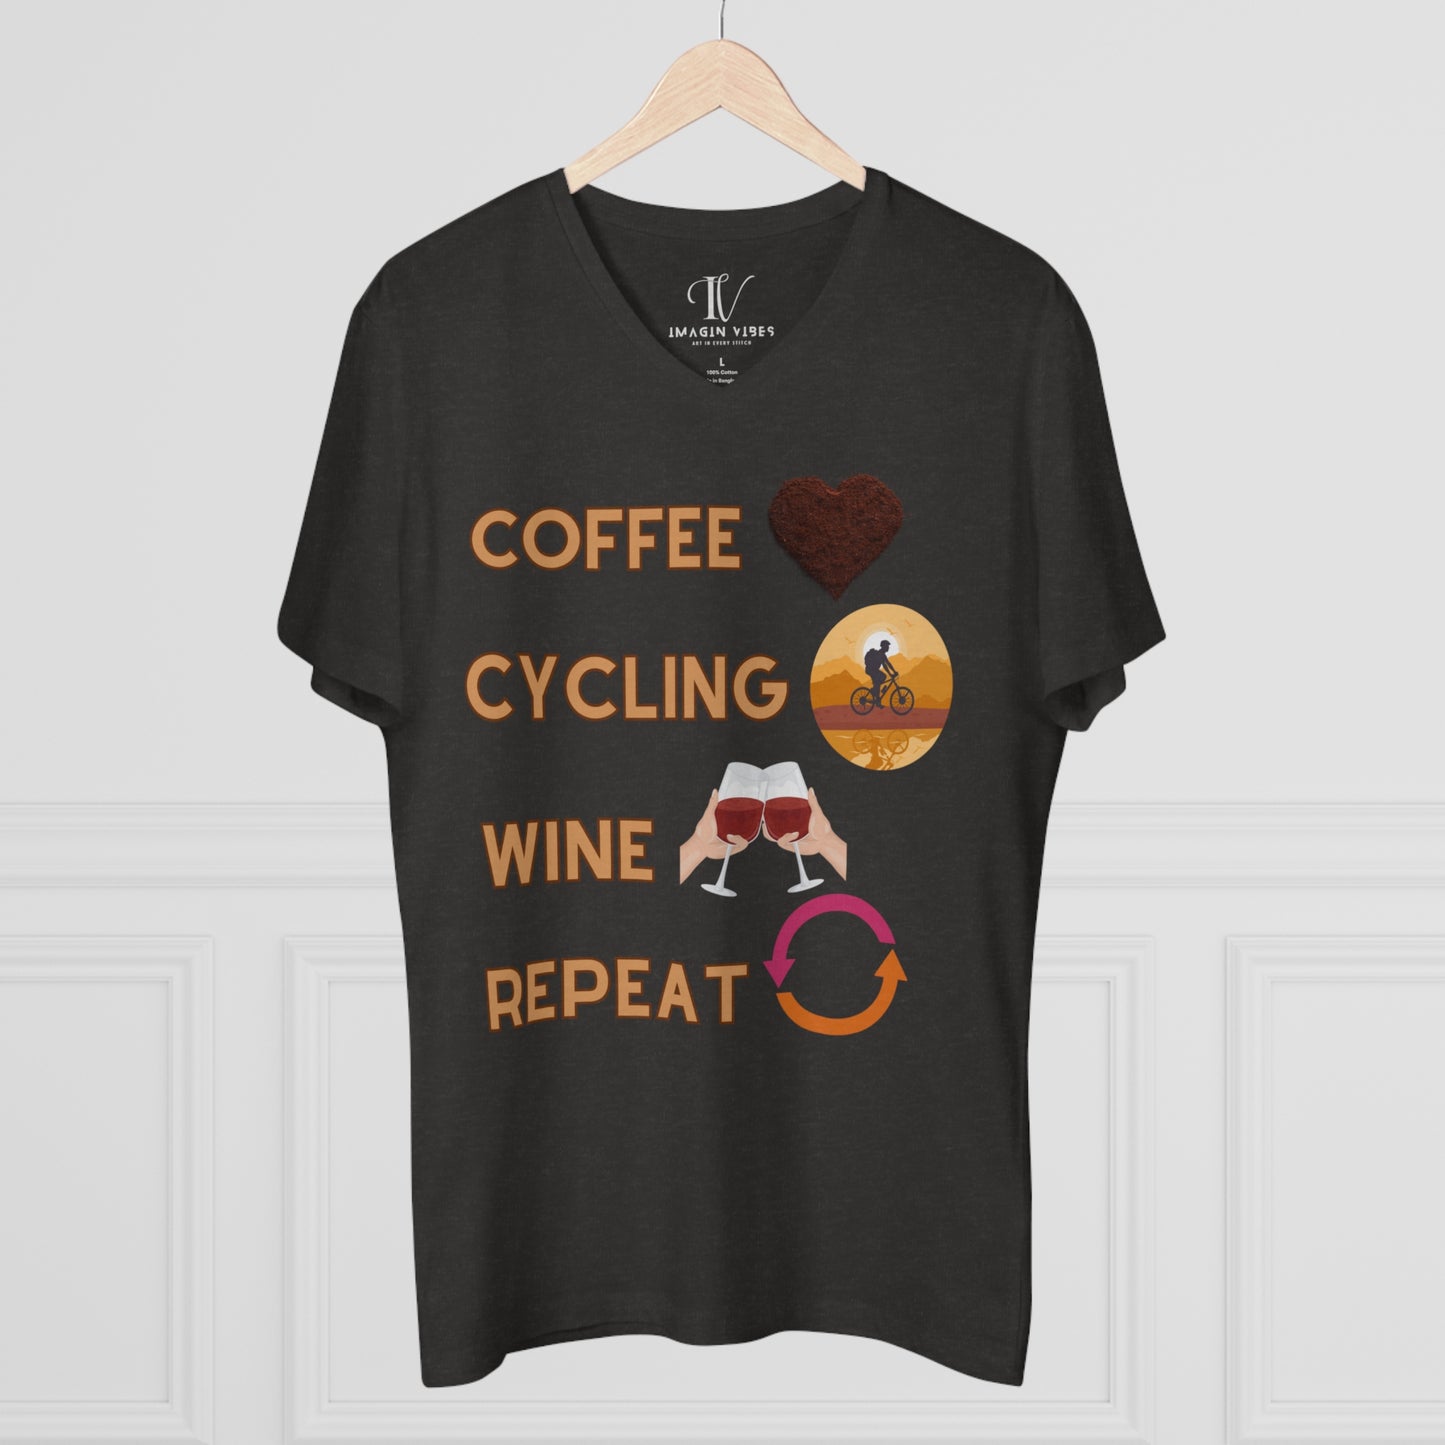 Minimalistic Bicycle T-Shirt for Men - Cotton Shirts, Eco-Friendly Gift for Coffee and Cycling Enthusiasts V-neck   